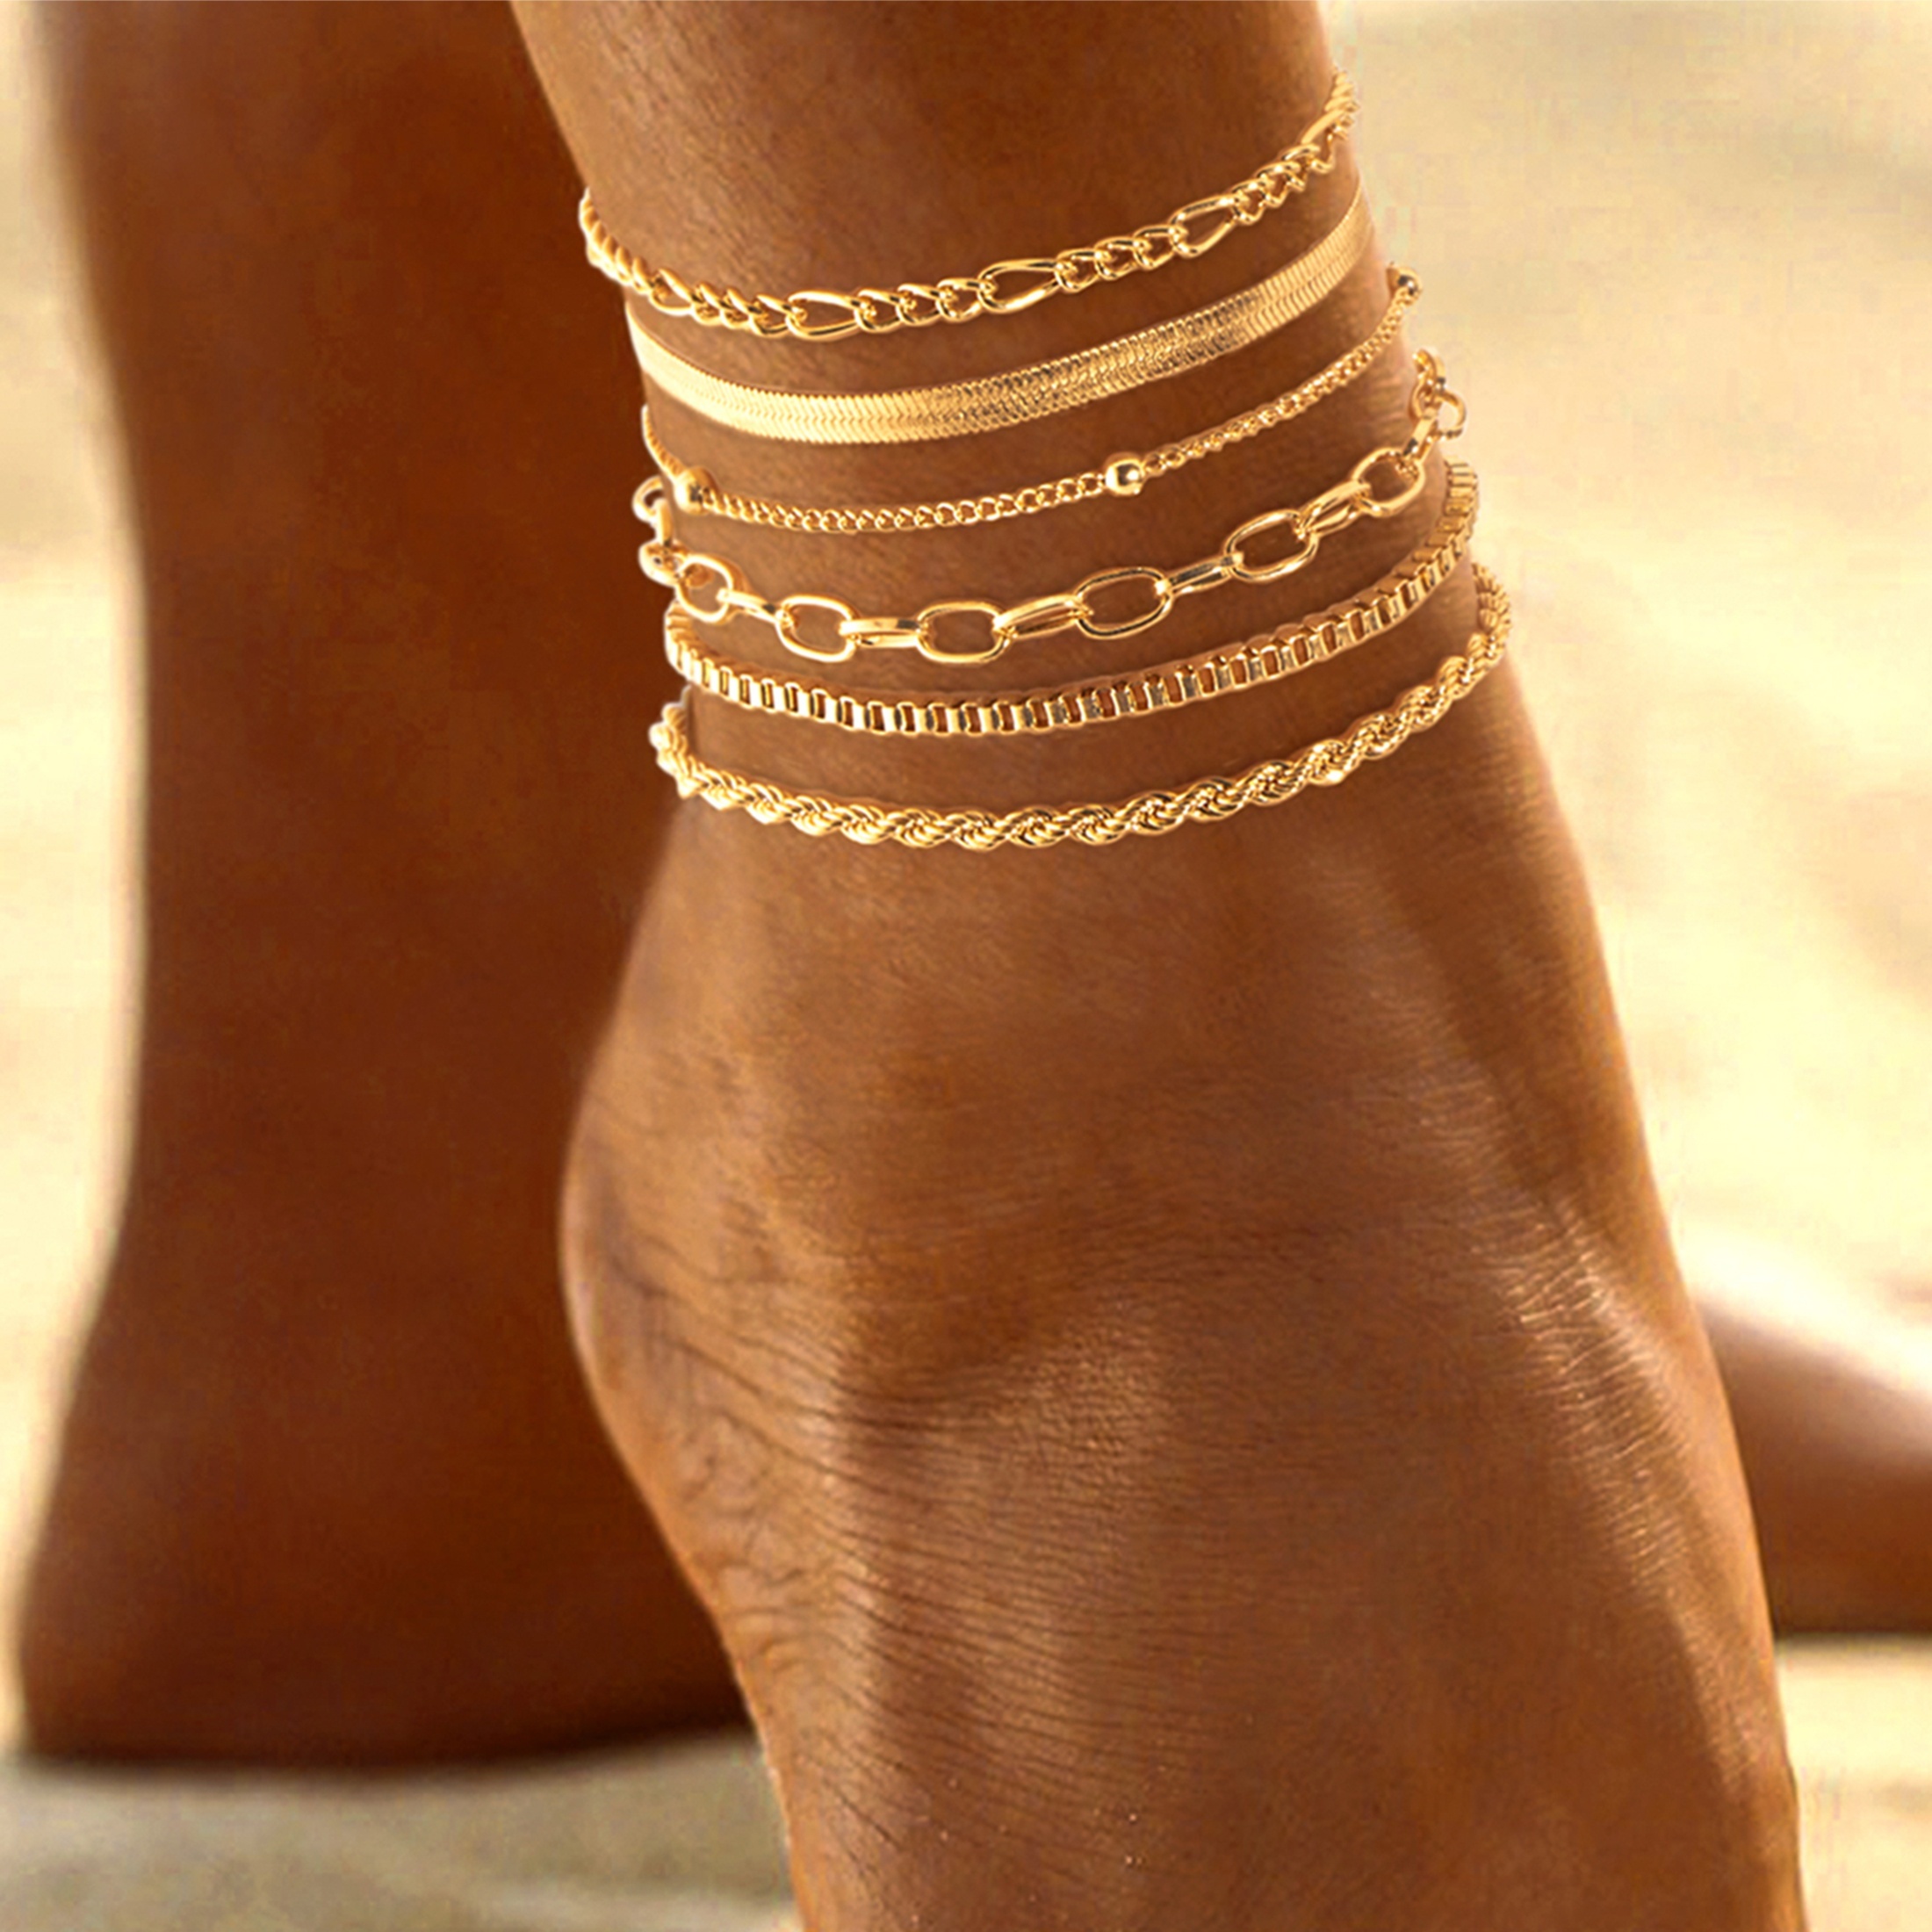 

Boho & Simply Style, Combination Set, Minimalist And Exquisite Style, Golden Copper Chain Anklets, Fashion Unique Accessory For Daily Wear, Idea Gift For Ladies